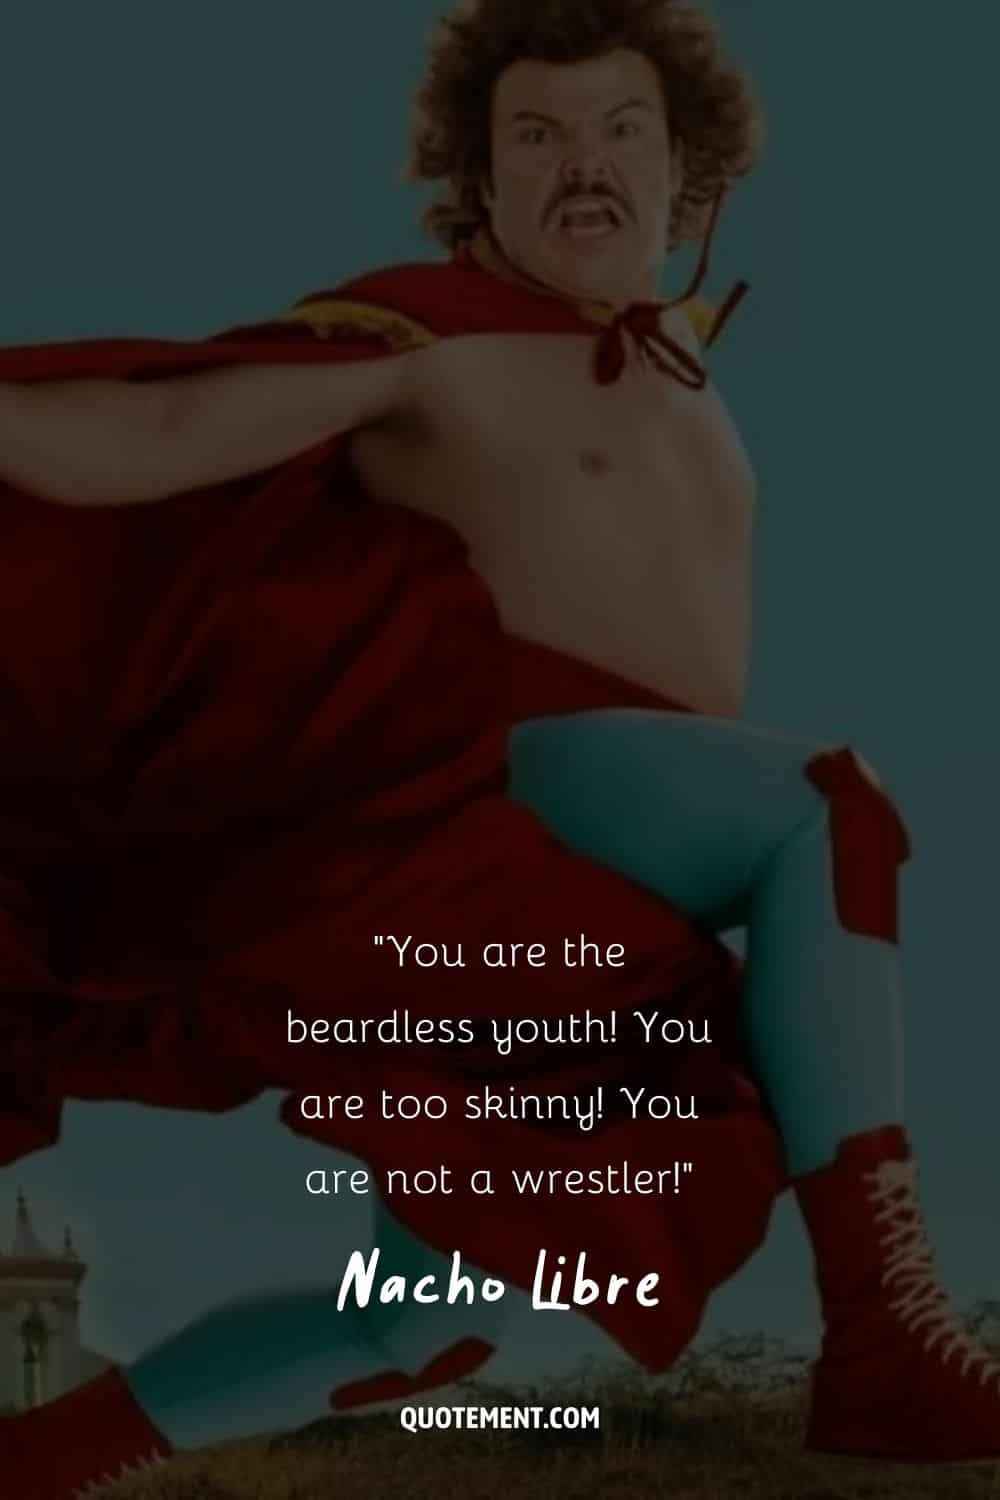 You are the beardless youth! You are too skinny! You are not a wrestler!